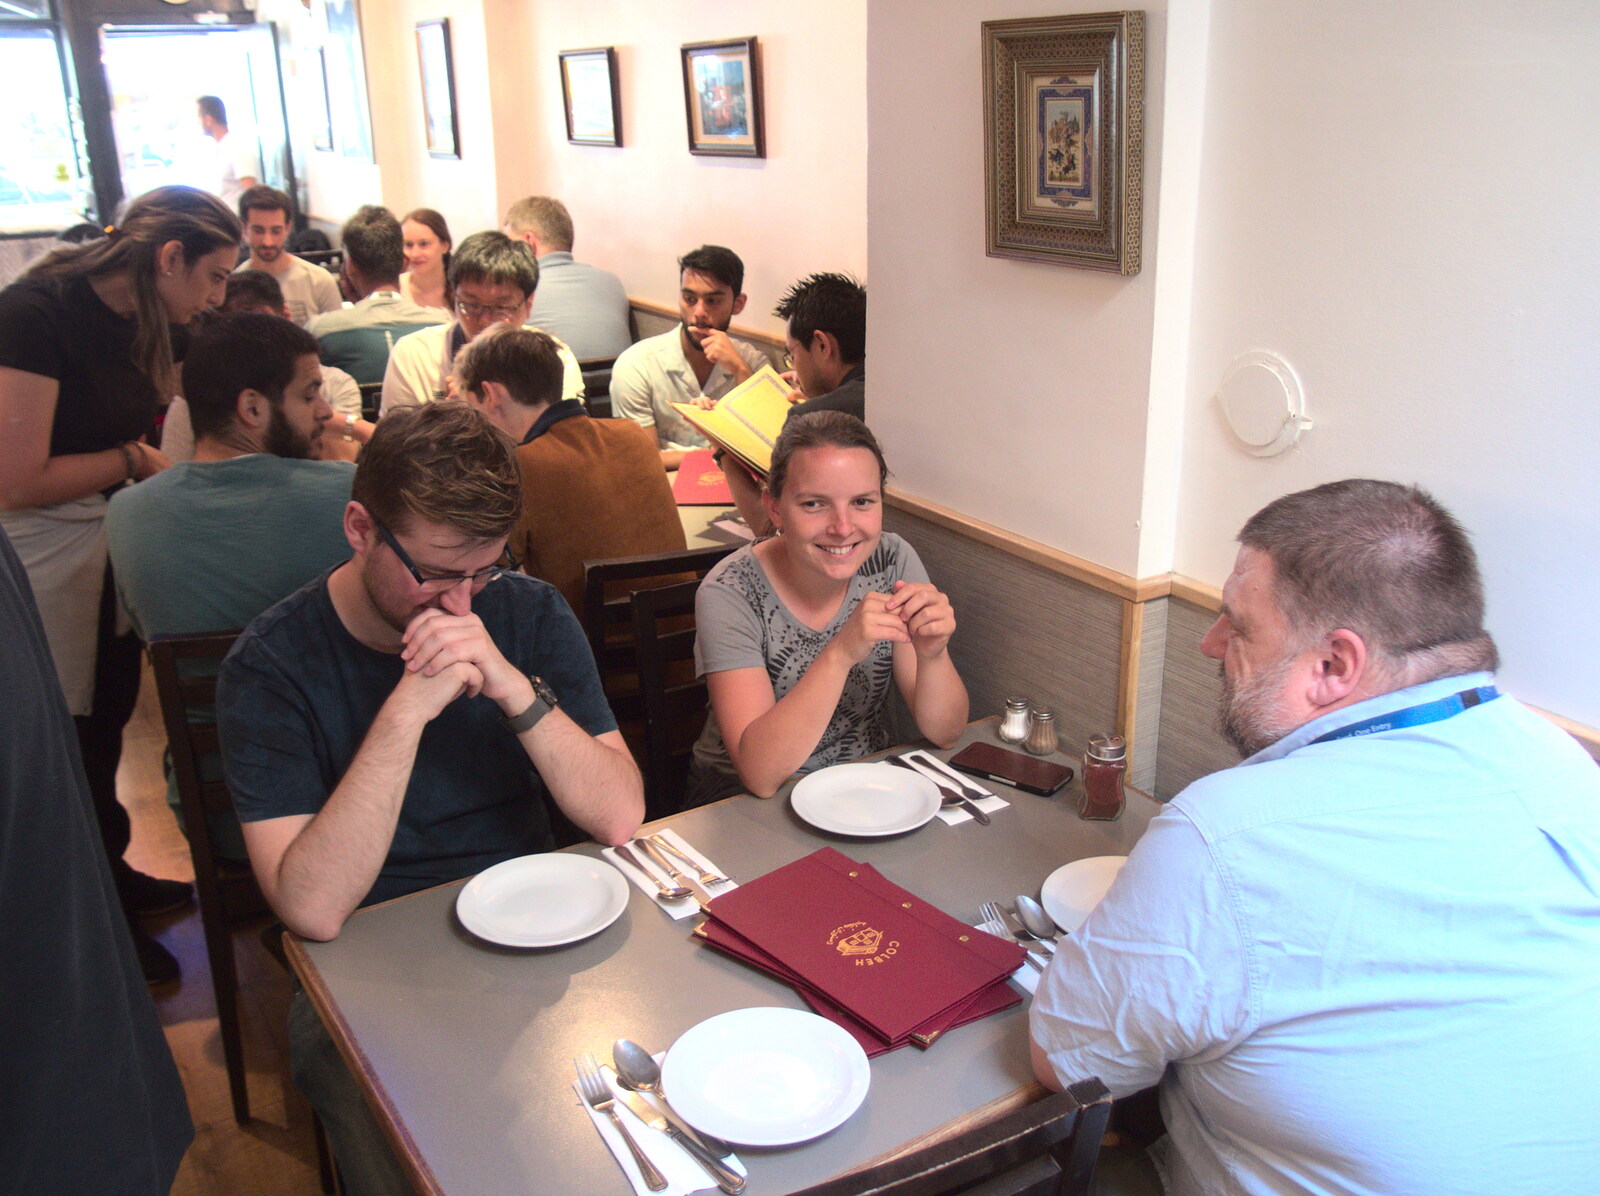 SwiftKey has taken over most of the restaurant from A SwiftKey Lunch, Porchester Place,  Edgware Road, London - 27th June 2018